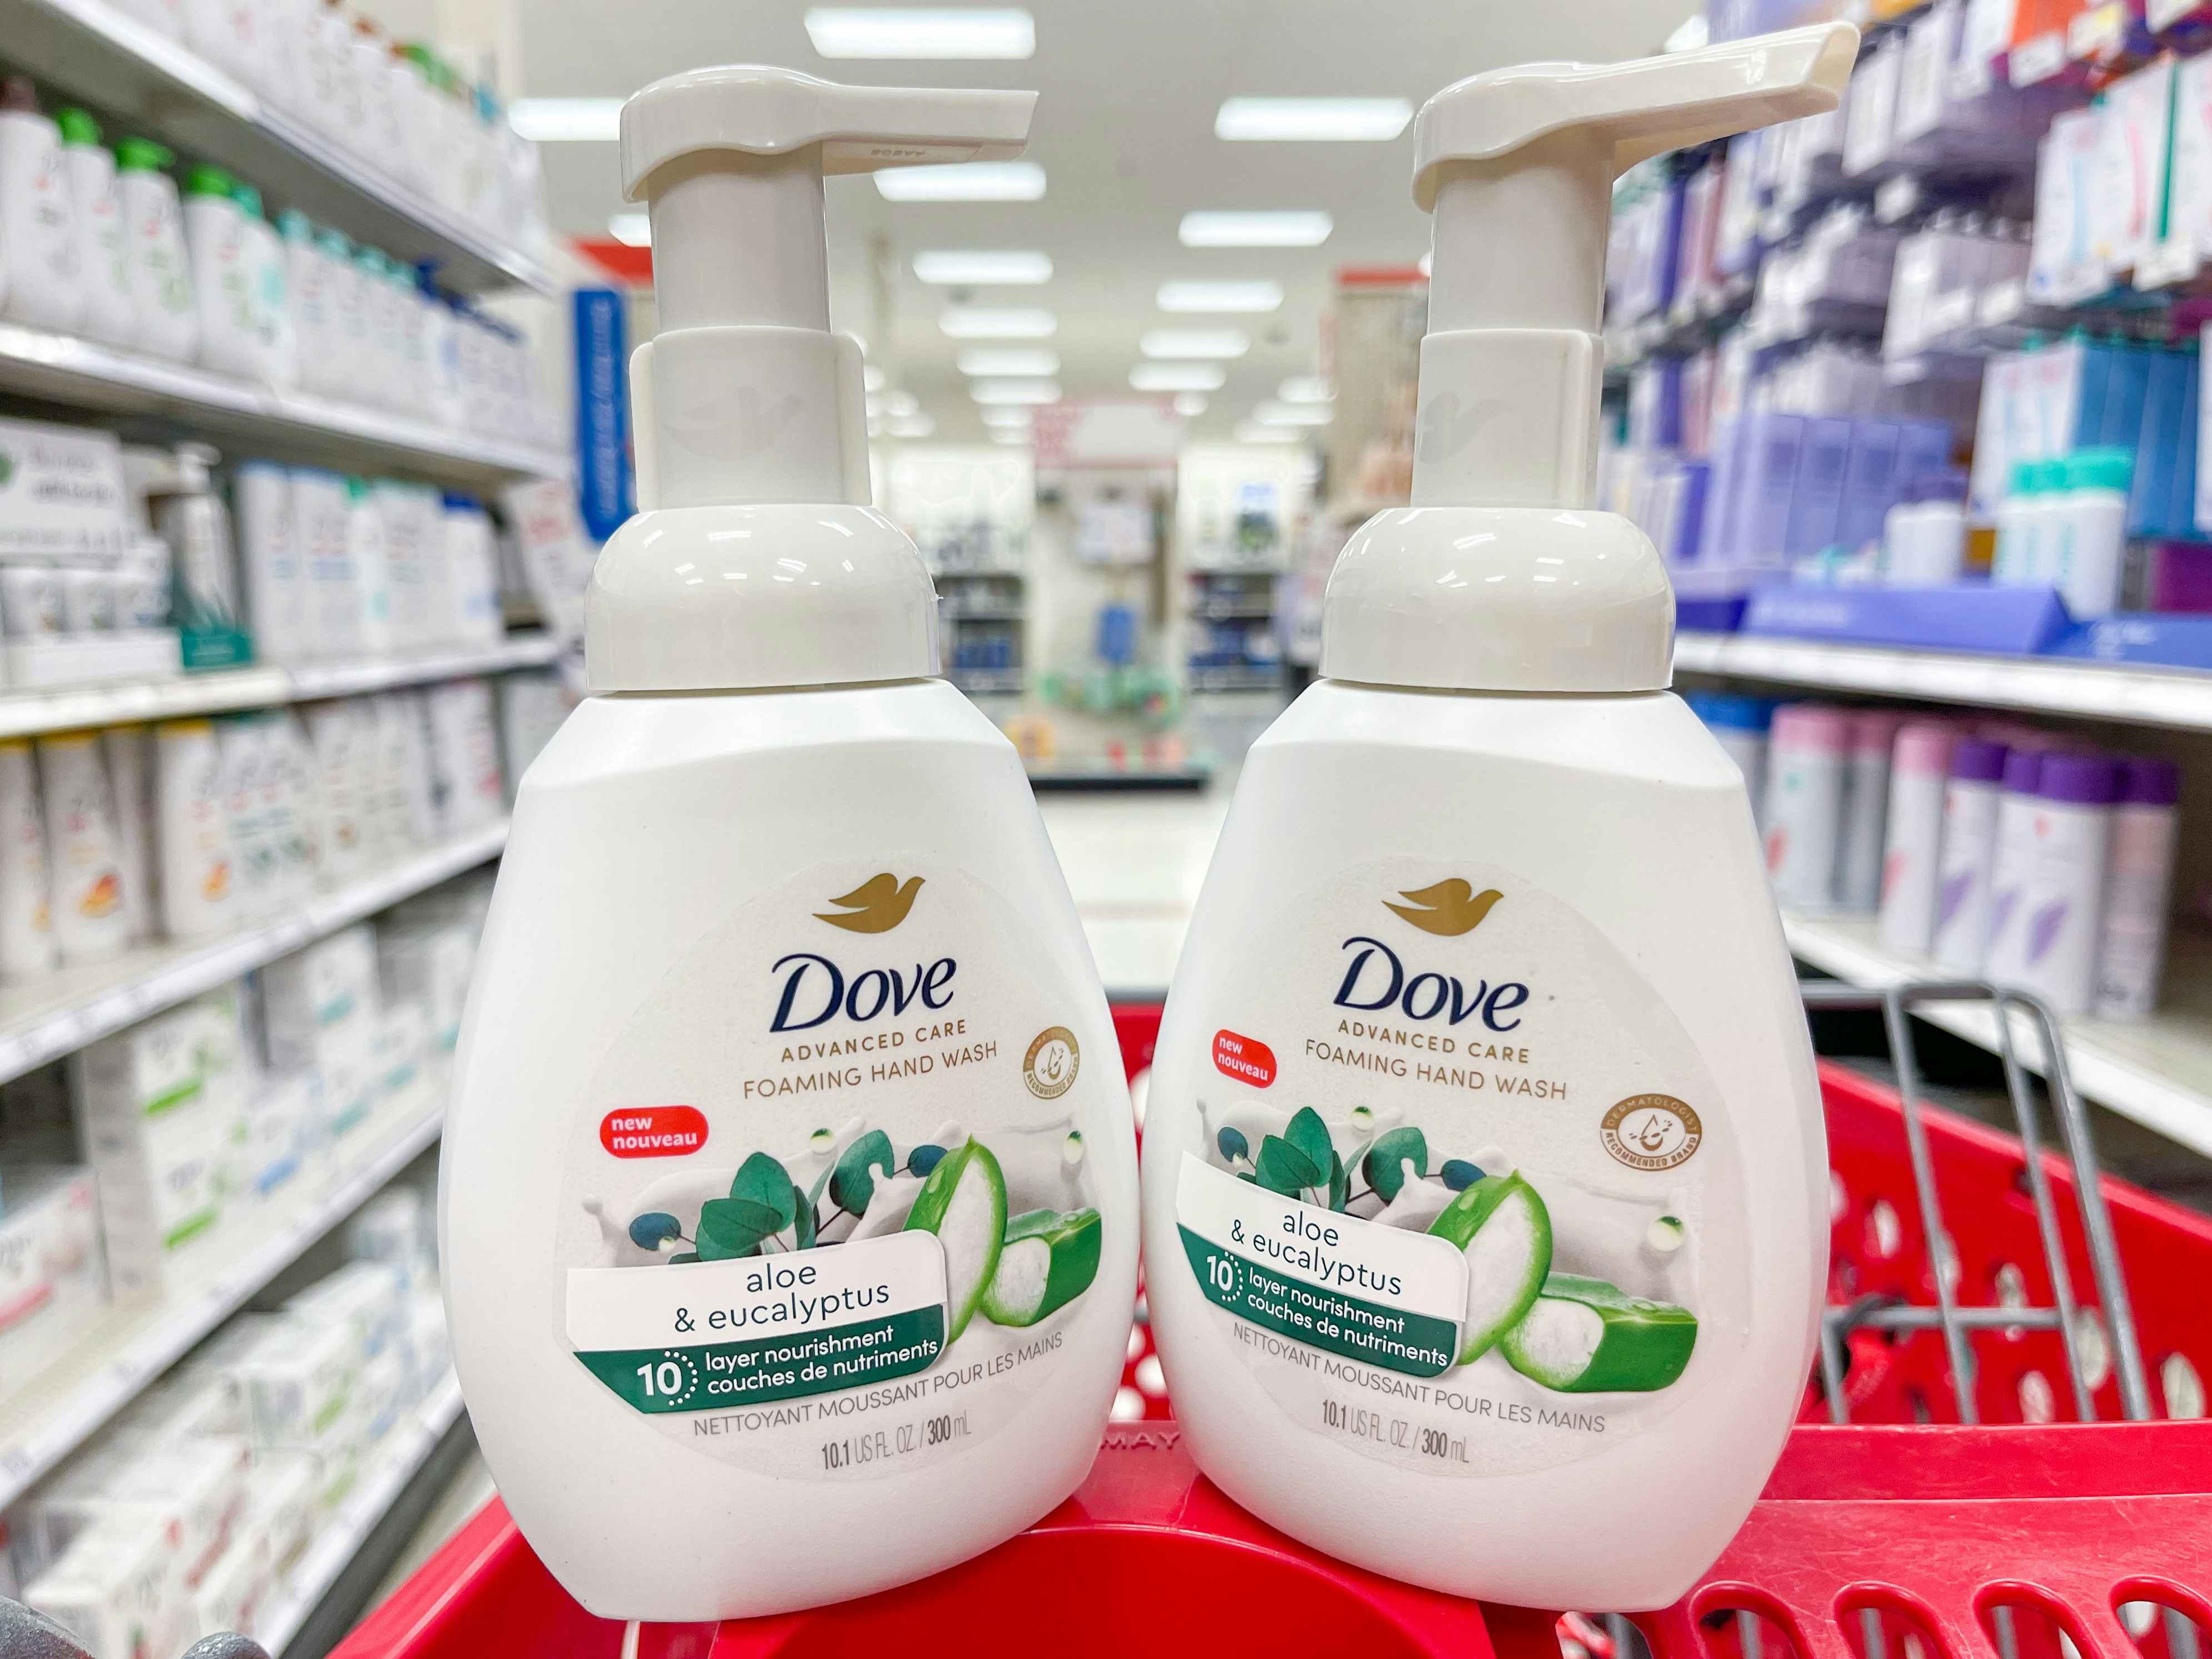 Dove Foaming Hand Wash 4-Pack, as Low as $11 on Amazon ($2.78 Each)